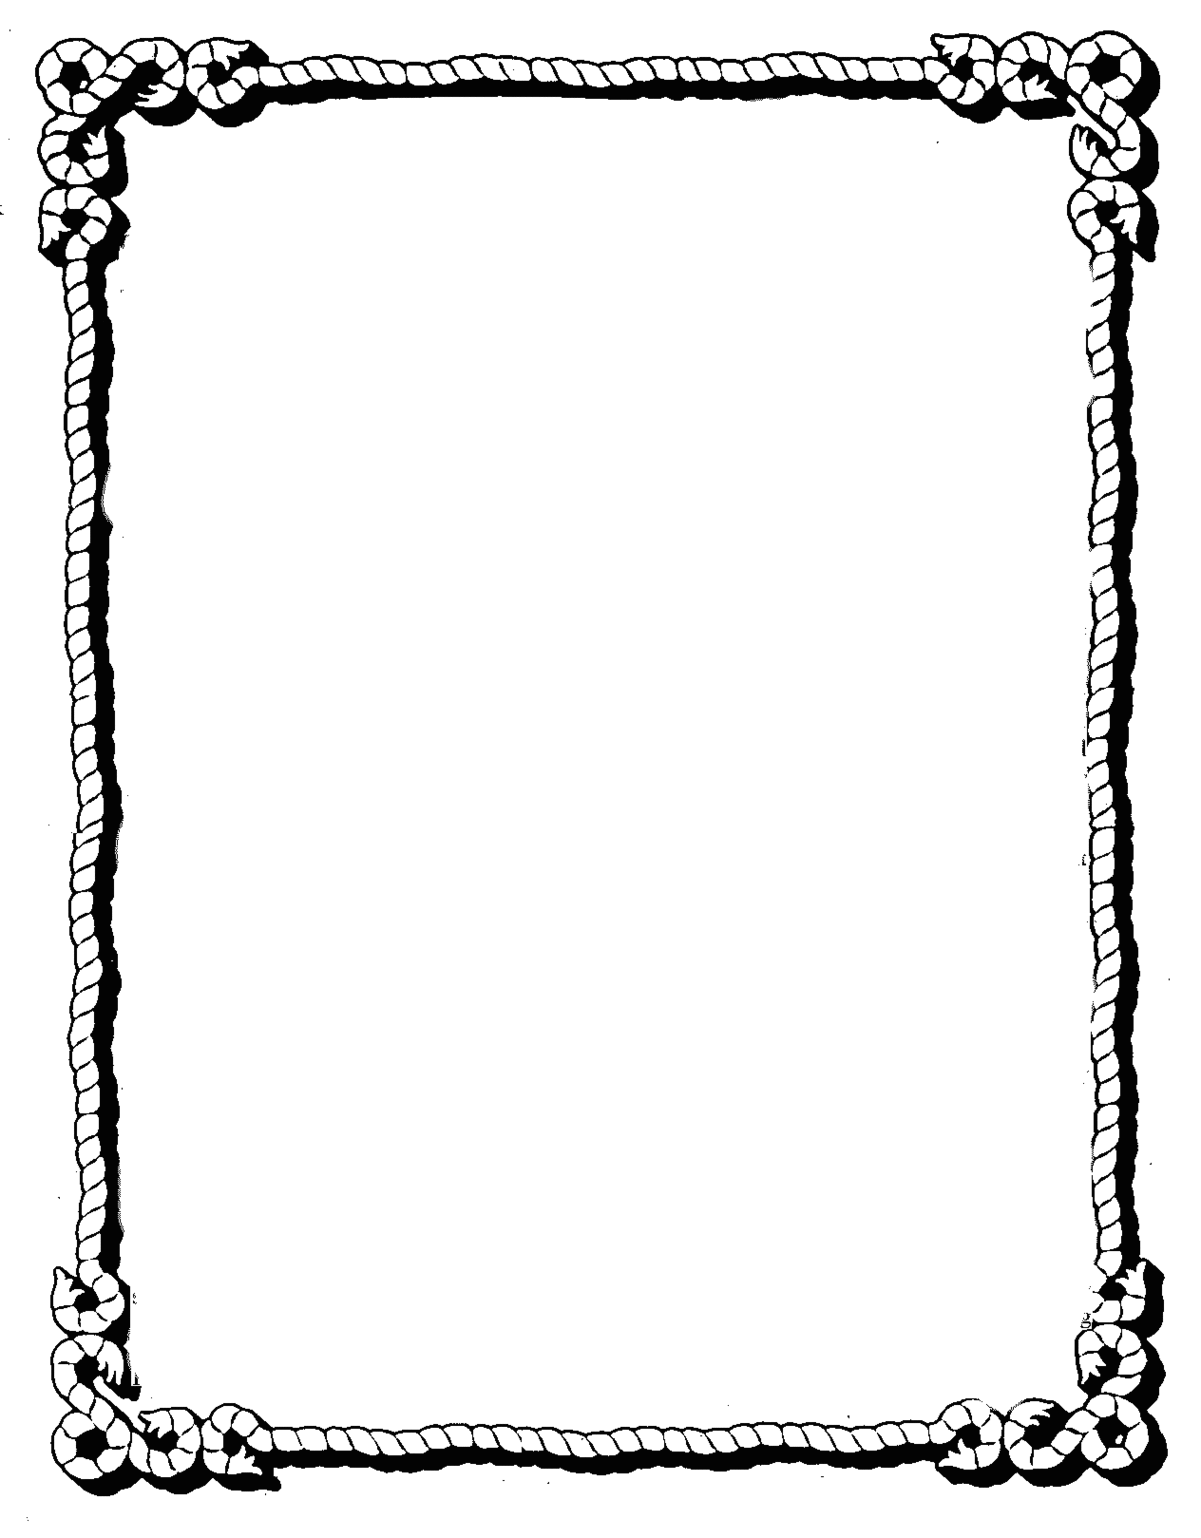 Simple Page Border Designs And Frames Clipart Free To Use Clip 